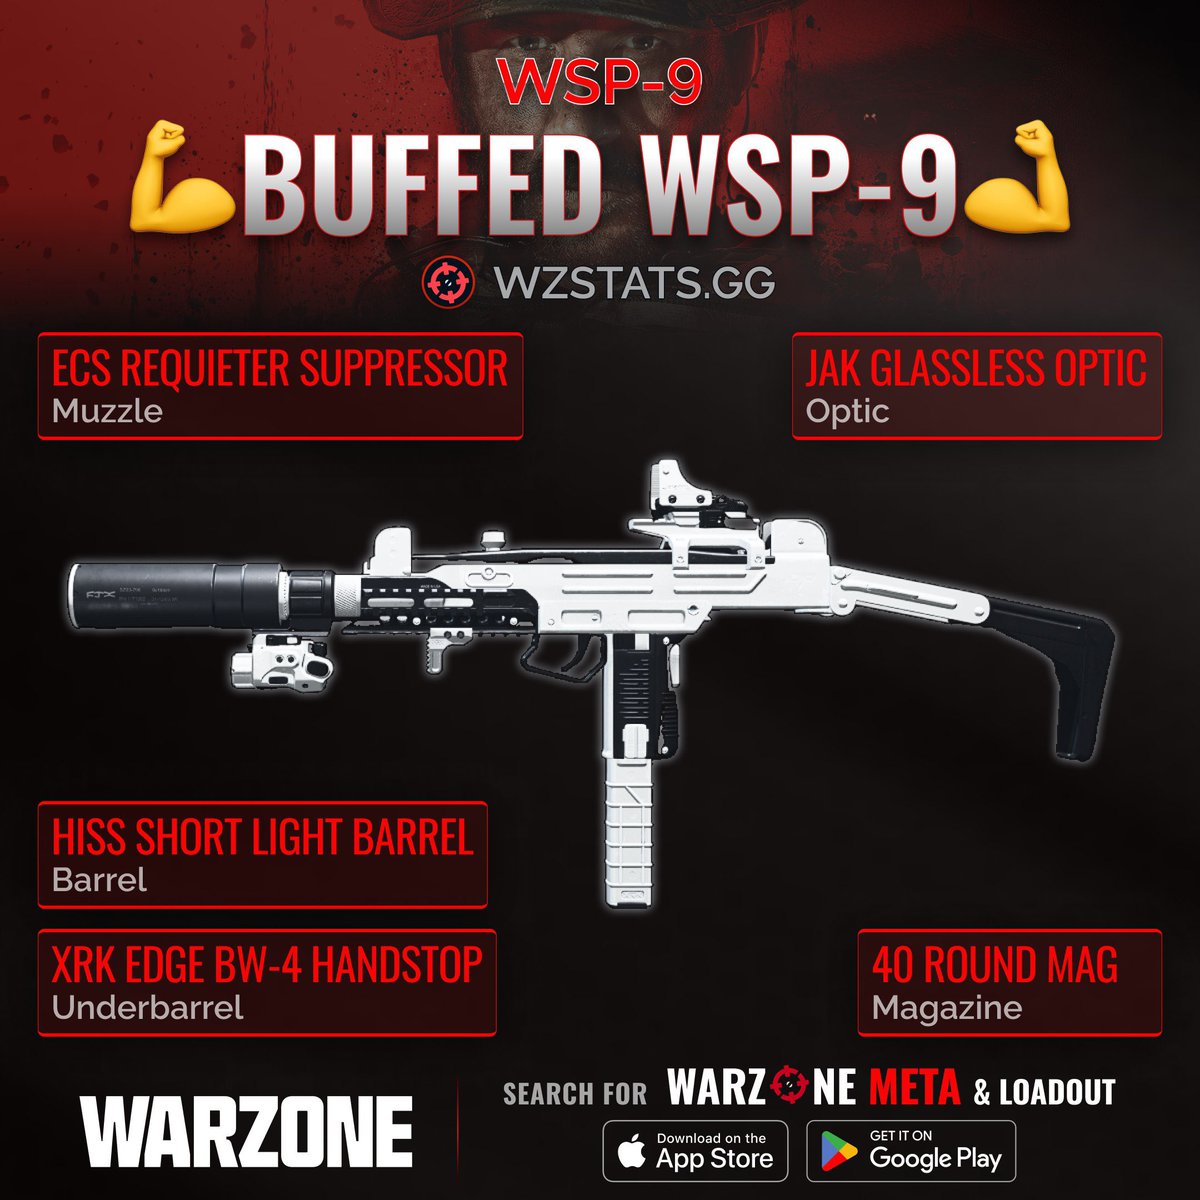 ‼️🚨 BUFFED WSP-9 SMG IN WARZONE 🚨‼️

💪 WSP-9 got a BIG BUFF to Sprint To Fire time in #Warzone!

Our build has:
✅ Low Recoil
✅ Fast ADS & High Mobility
✅ FAST Sprint To Fire Time
✅ High Damage per Mag
✅ Suppressed

🔻 Slow Fire Rate (1 missed shot slows down TTK by 100ms)